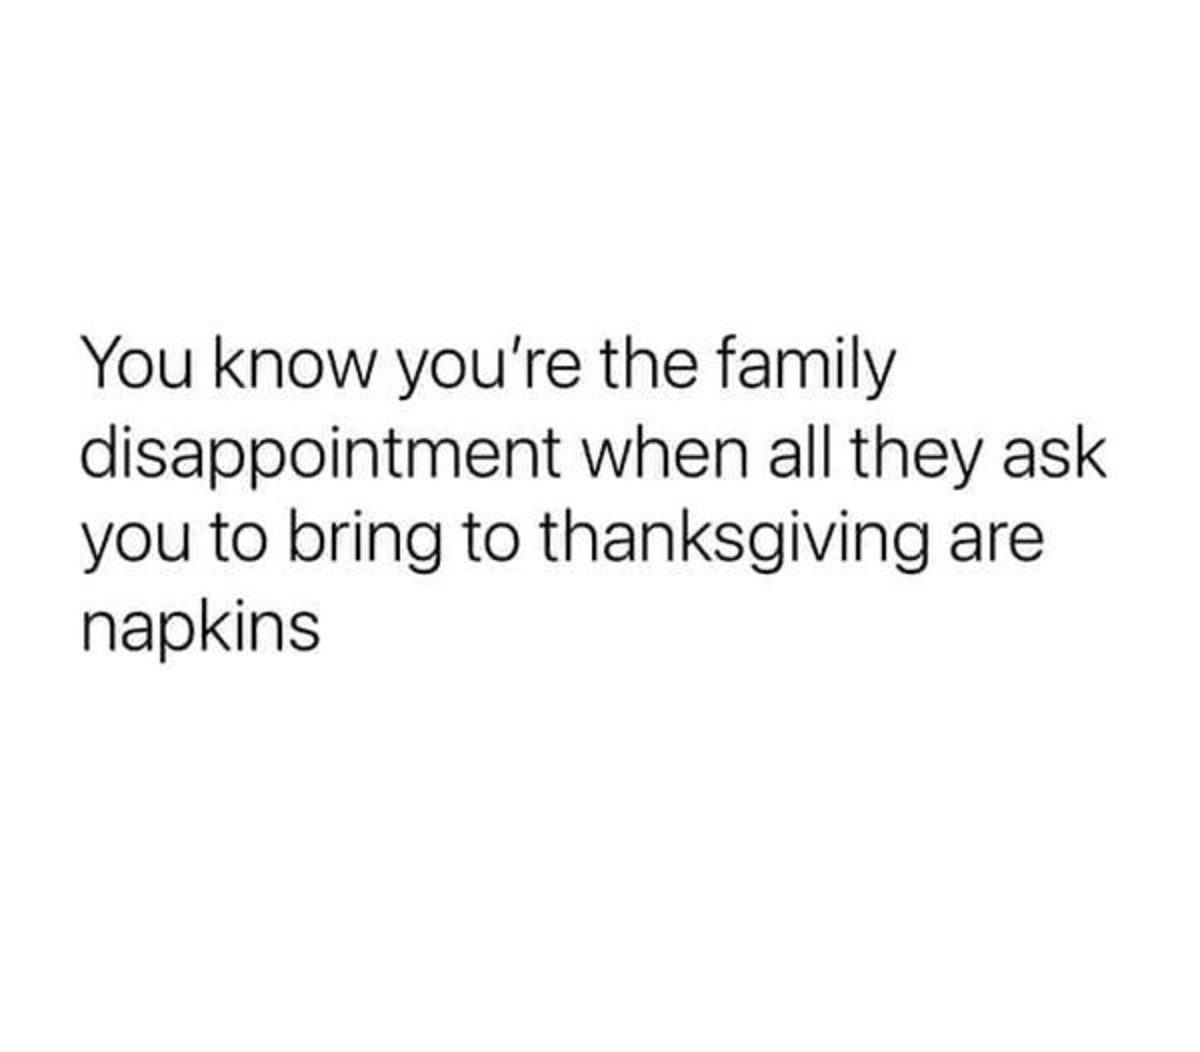 You know you're the family disappointment when all they ask you to bring to thanksgiving are napkins